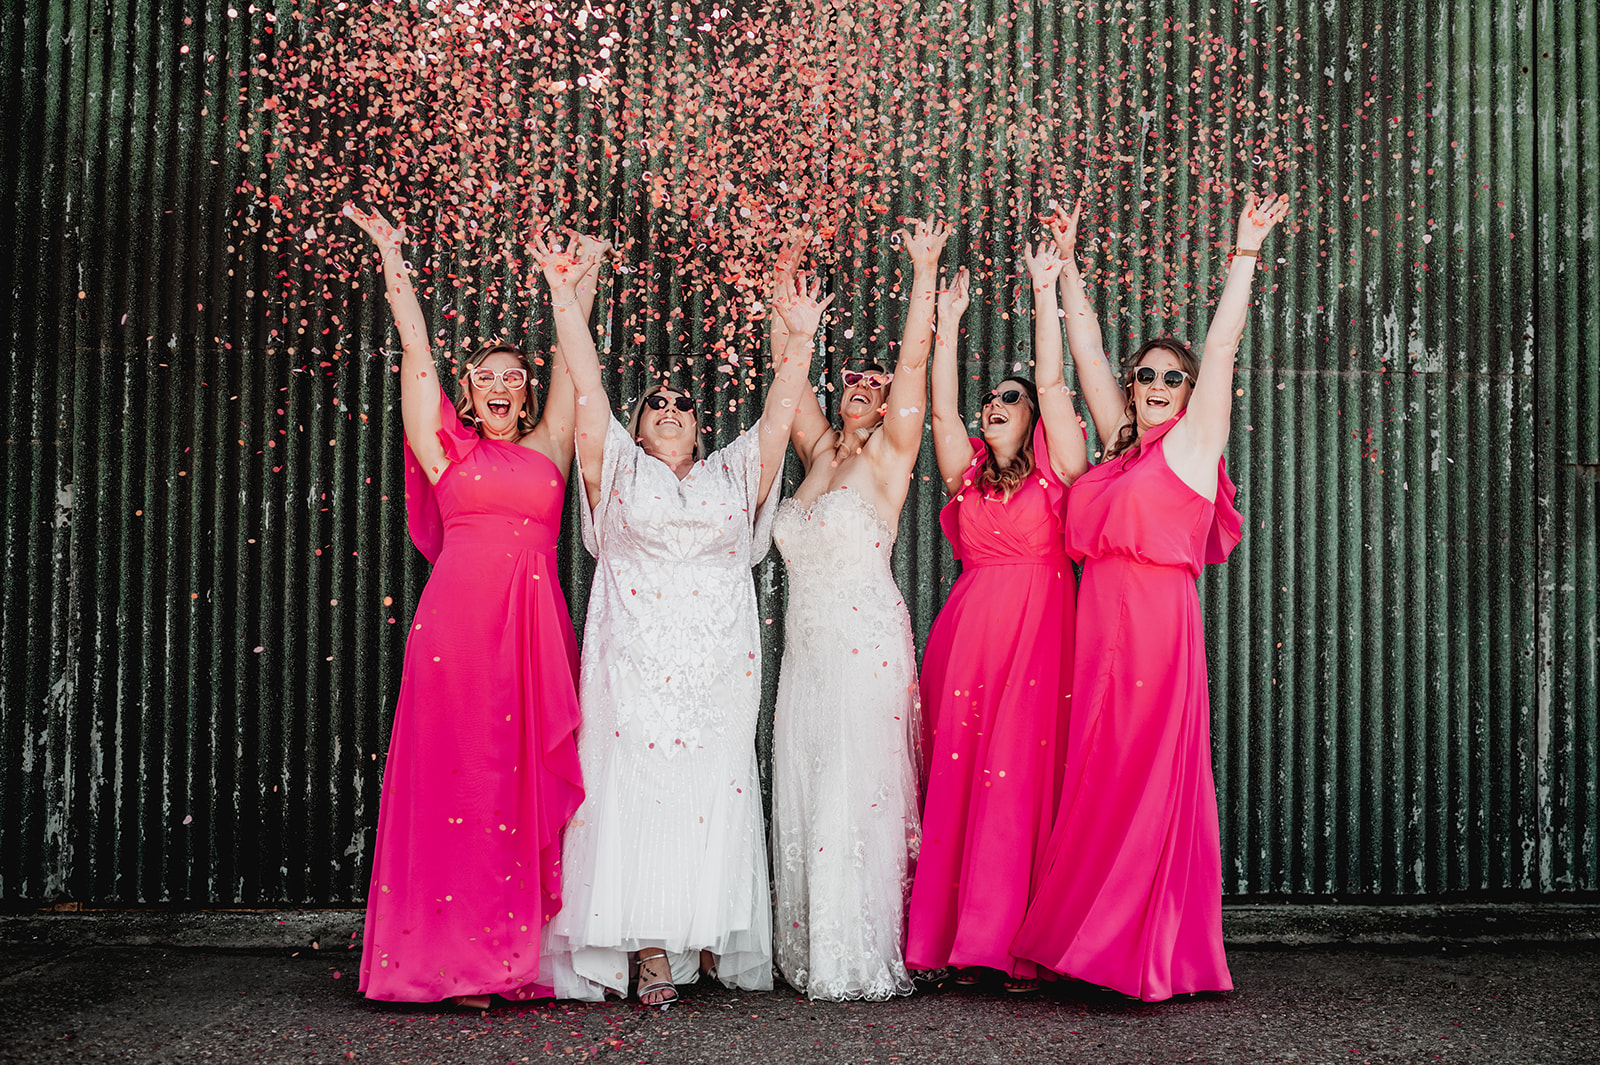 A bridal party celebrate by throwing confetti in the air